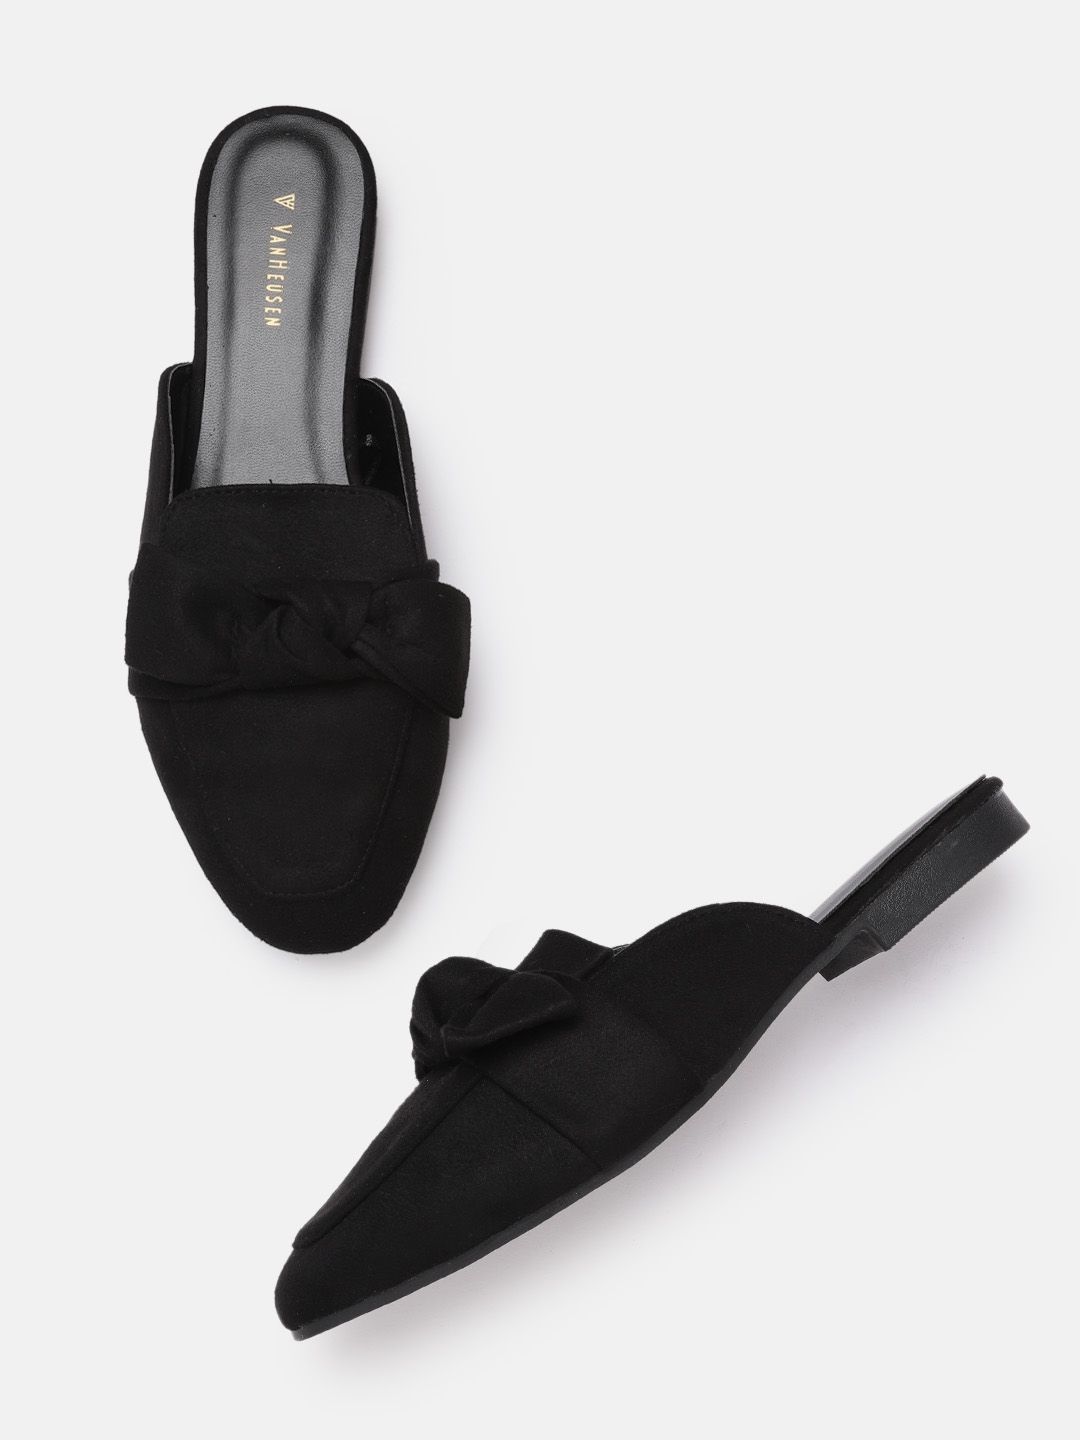 Van Heusen Woman Black Solid Suede Finish Mules with Bows Price in India